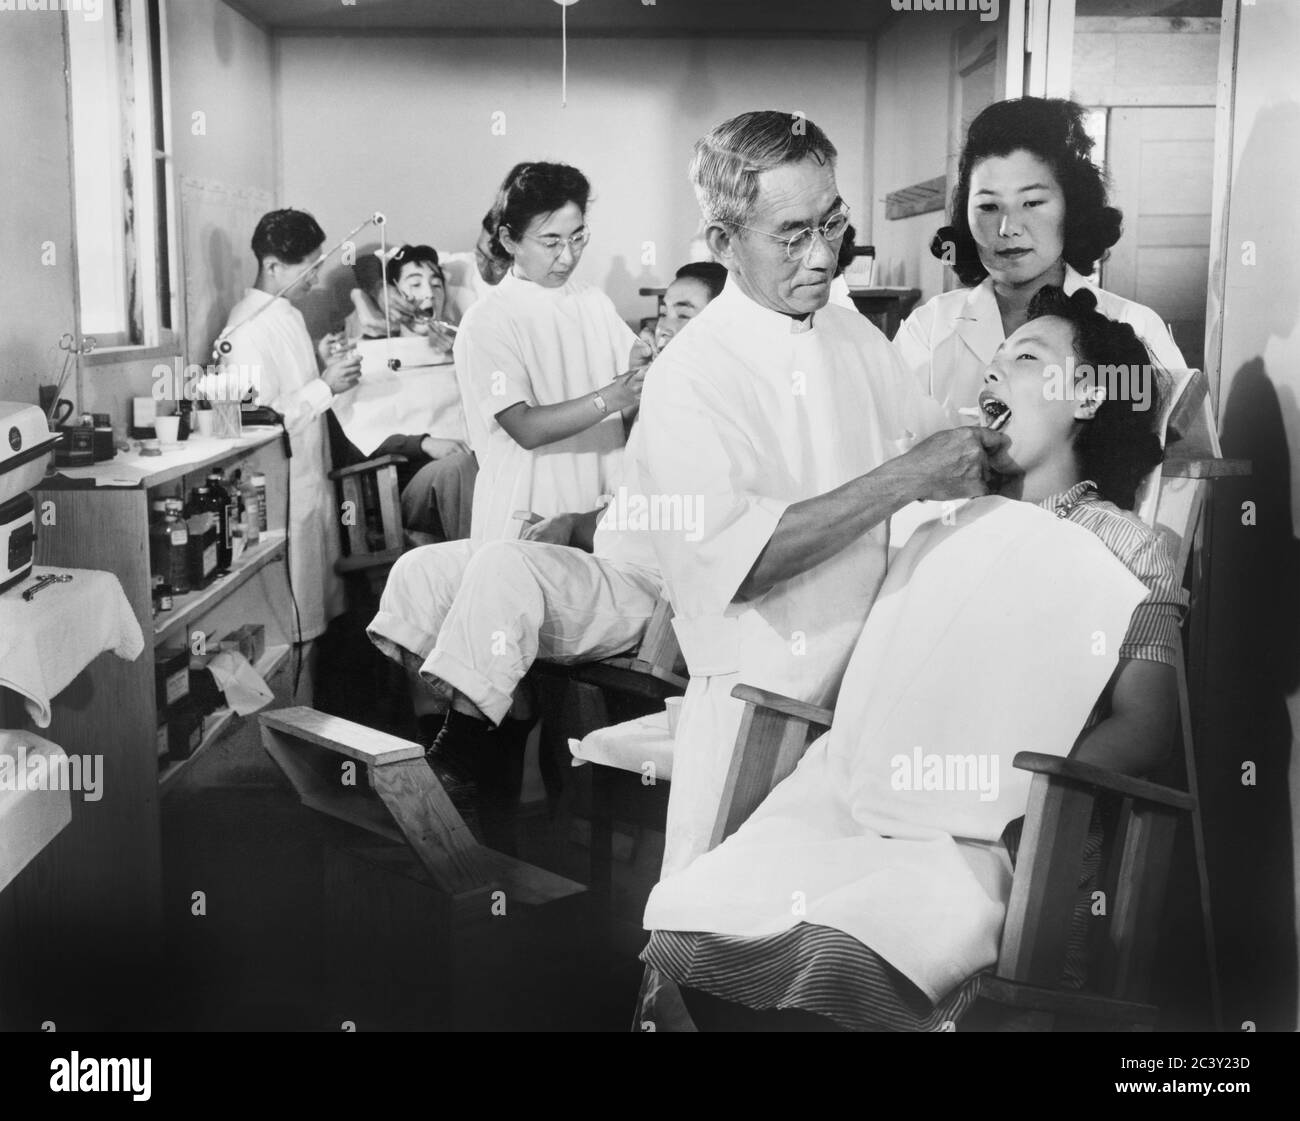 Evacuati di Ancestry giapponese in Dental Facility, Pinedale Assembly Center, Pinedale, California, USA, U.S. Army Signal Corps, 1942 Foto Stock